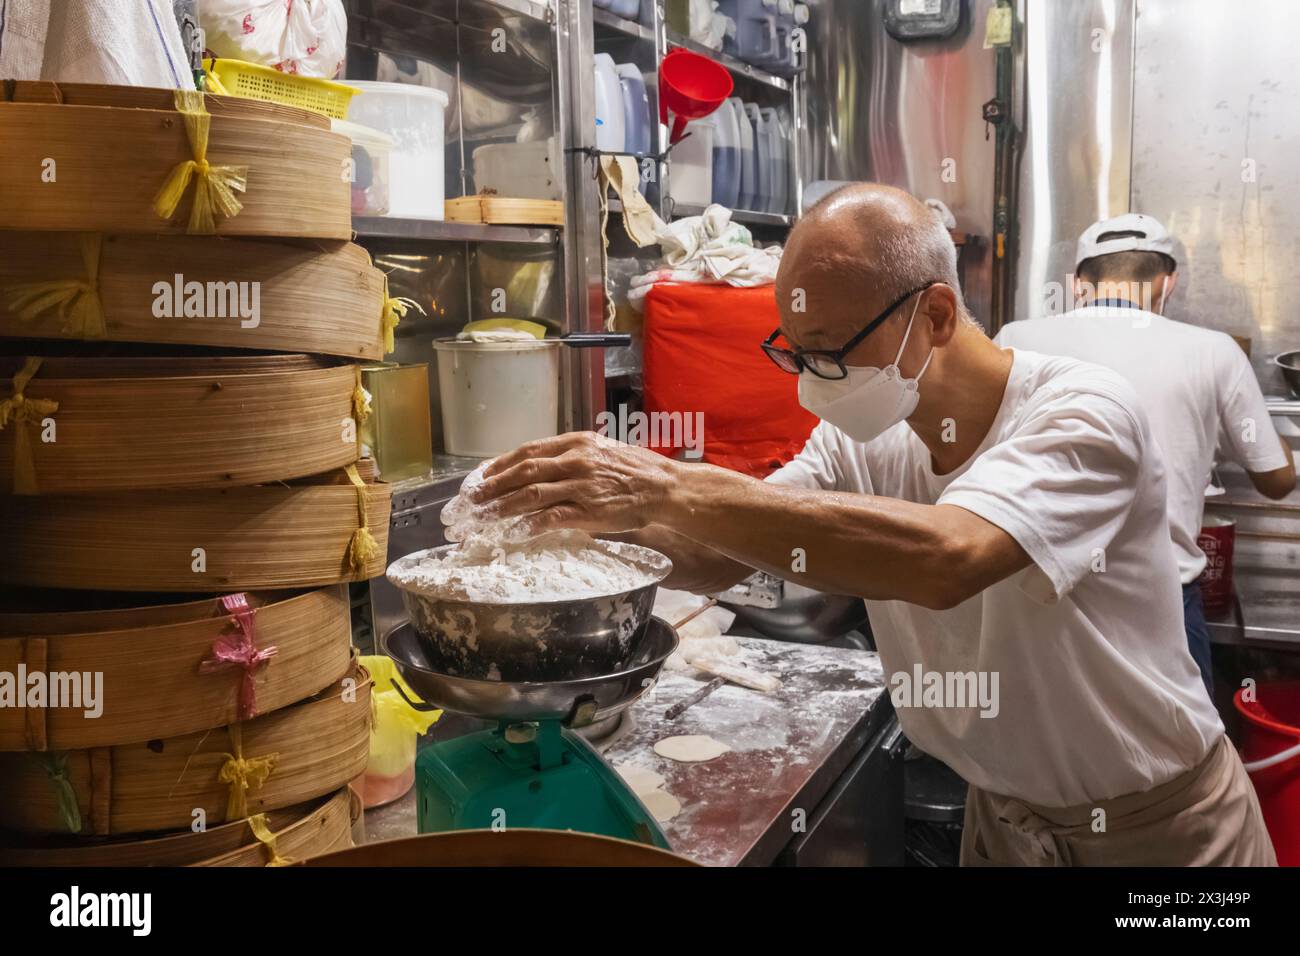 Asia, Singapore, Chinatown, Typical Food Court, Hawker Stall Kitchen Making Chinese Dim Sum Steamed Food Stock Photo